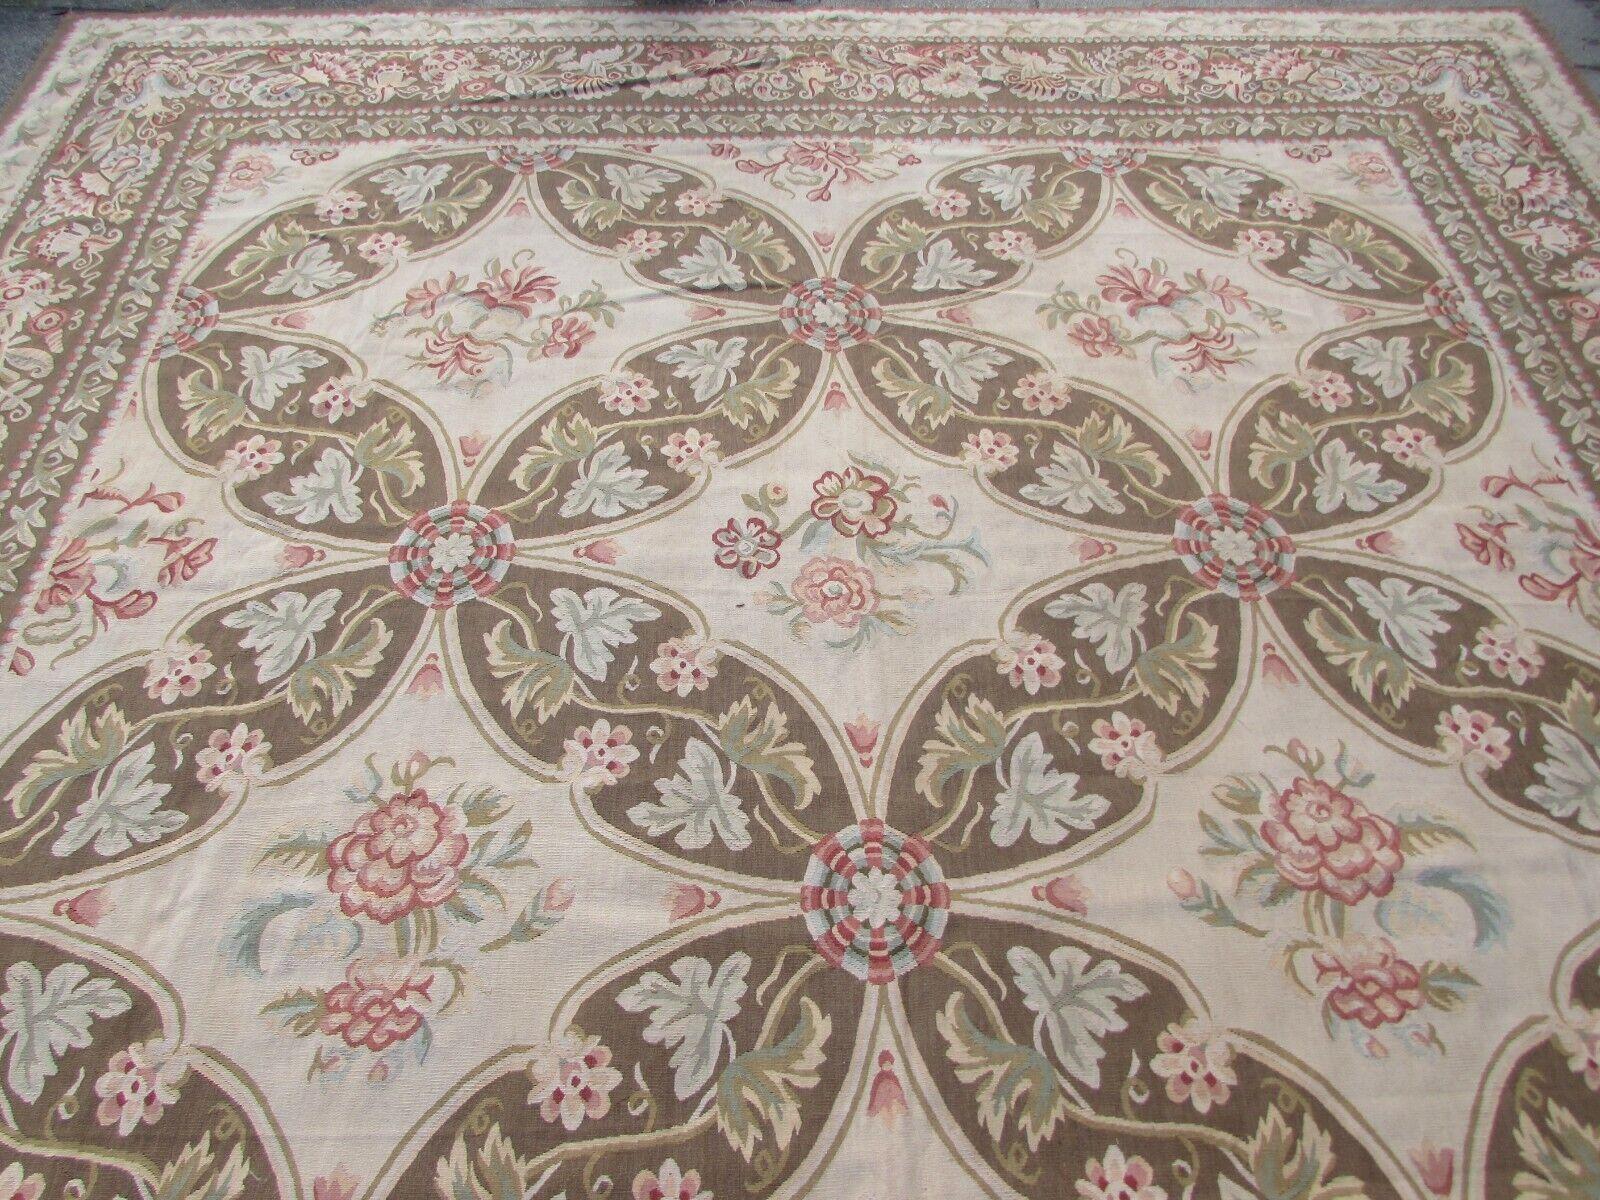 Hand-Knotted Handmade Vintage French Aubusson Flatweave Rug 9.9' x 14.2', 1970s, 1Q42 For Sale